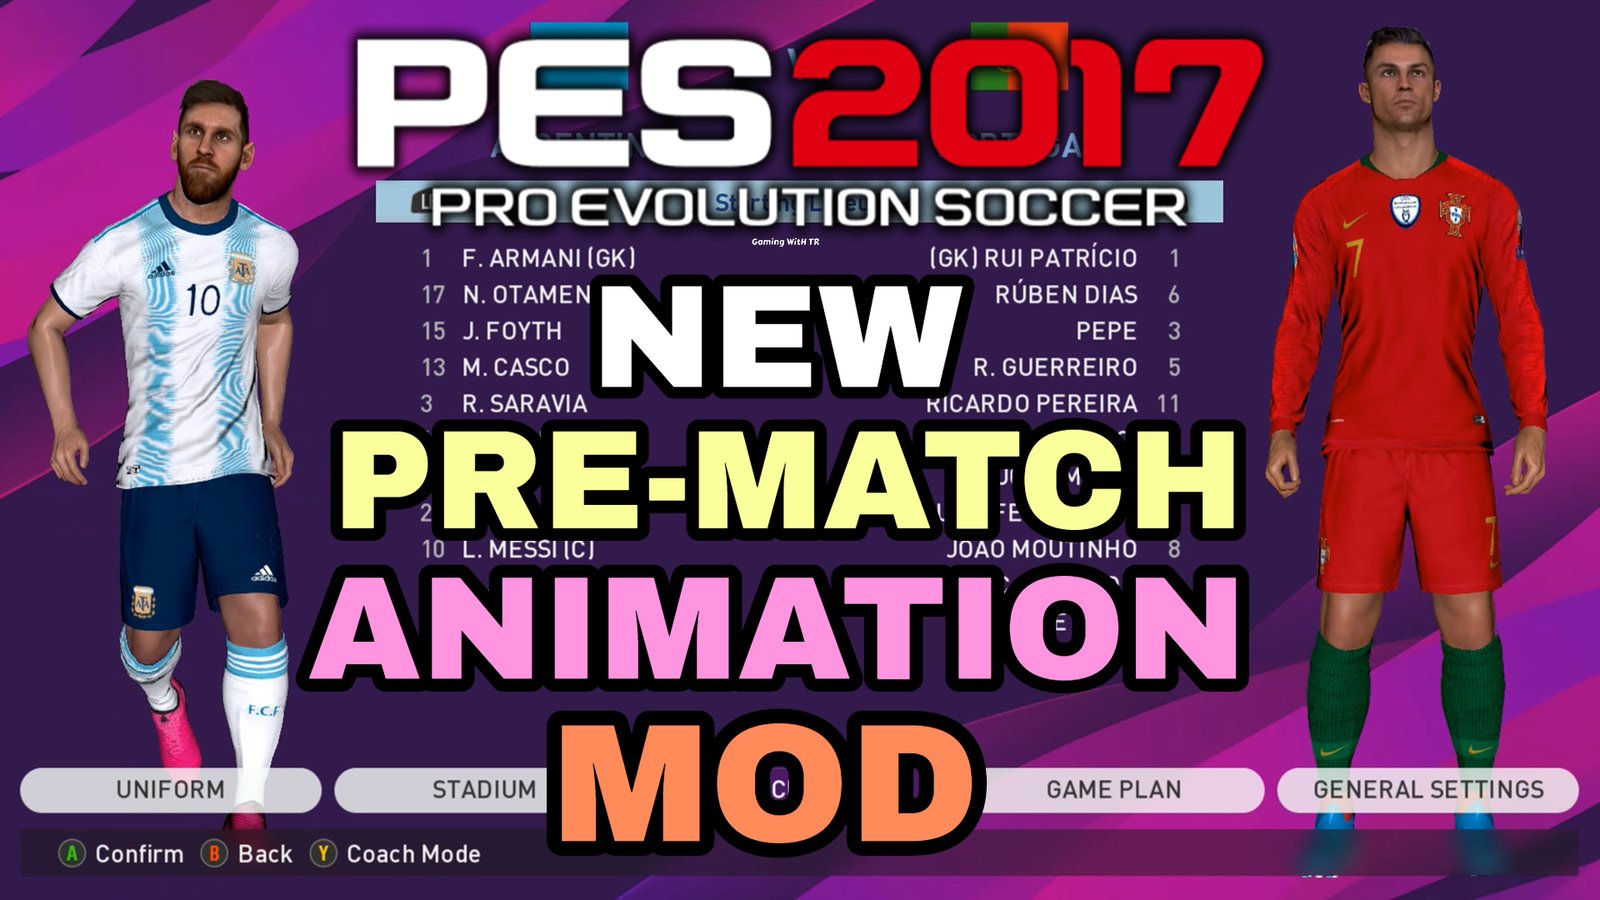 NEW PRE-MATCH ANIMATION MOD - New Updates Of PES MODS - Gaming WitH TR